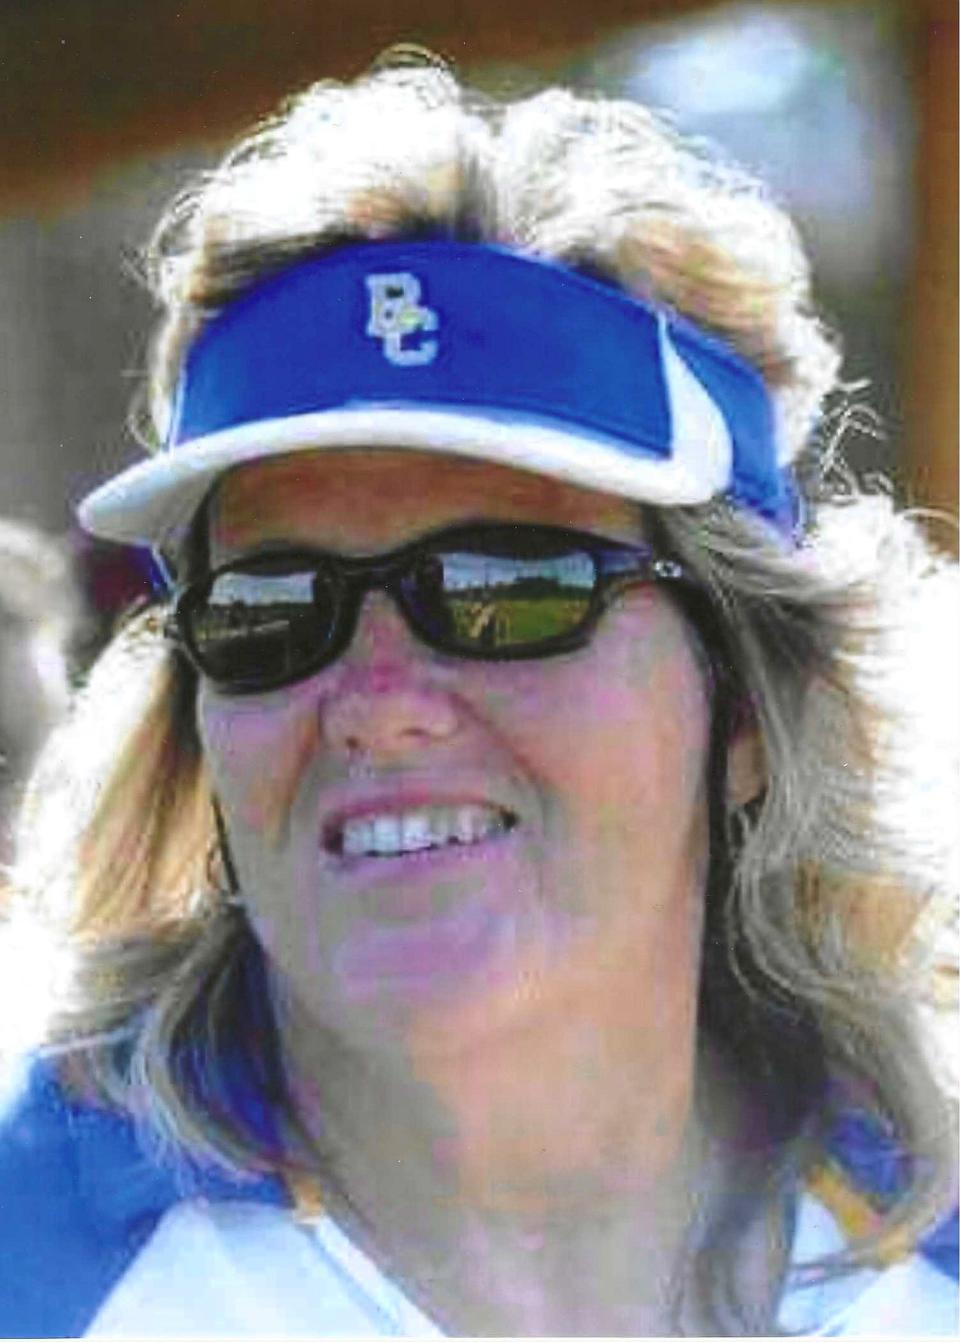 Pam Pickett will be inducted into the Buena Regional Hall of Fame on Nov. 26.